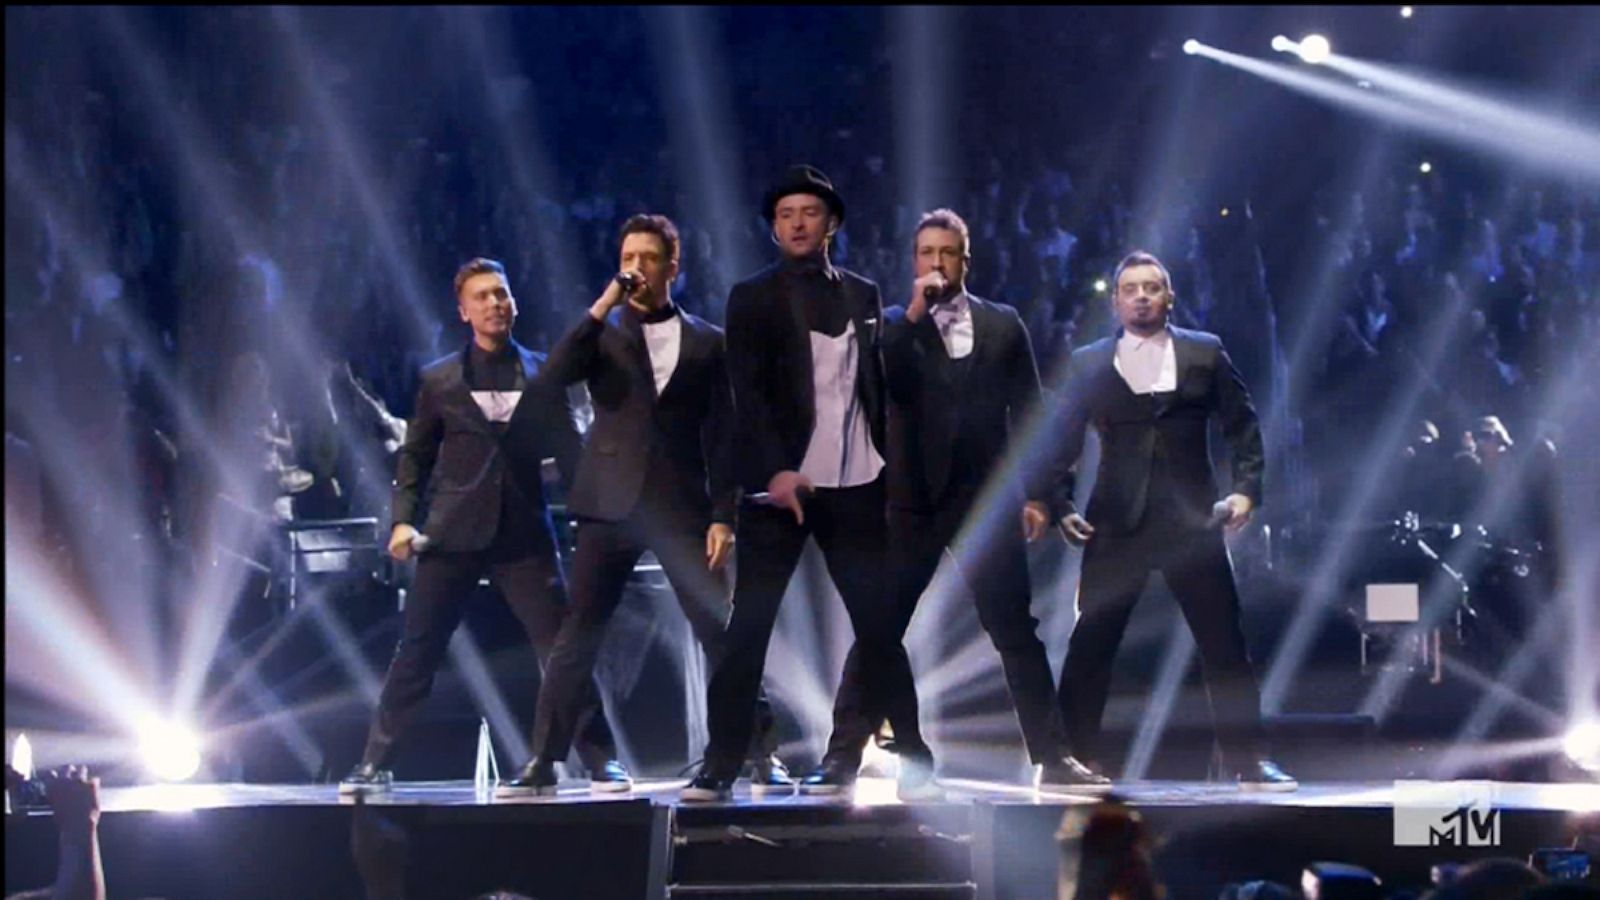 Justin Timberlake waves to the 80,000 faces on stage at the